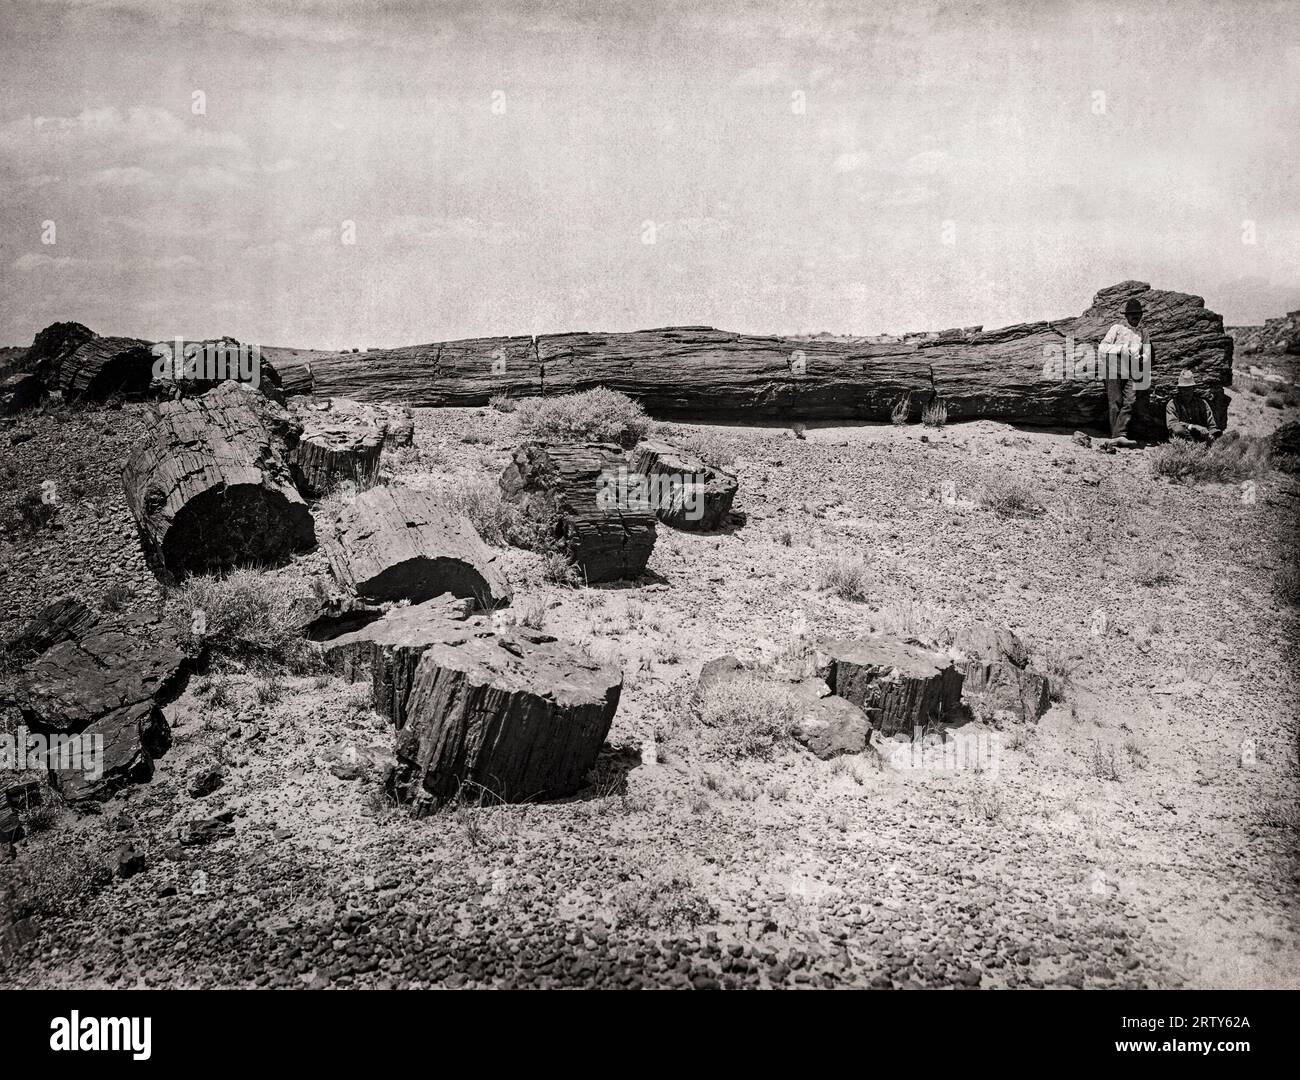 Arizona, c. 1890  View of Painted Desert and petrified wood in the Petrified Forest National Park. Stock Photo